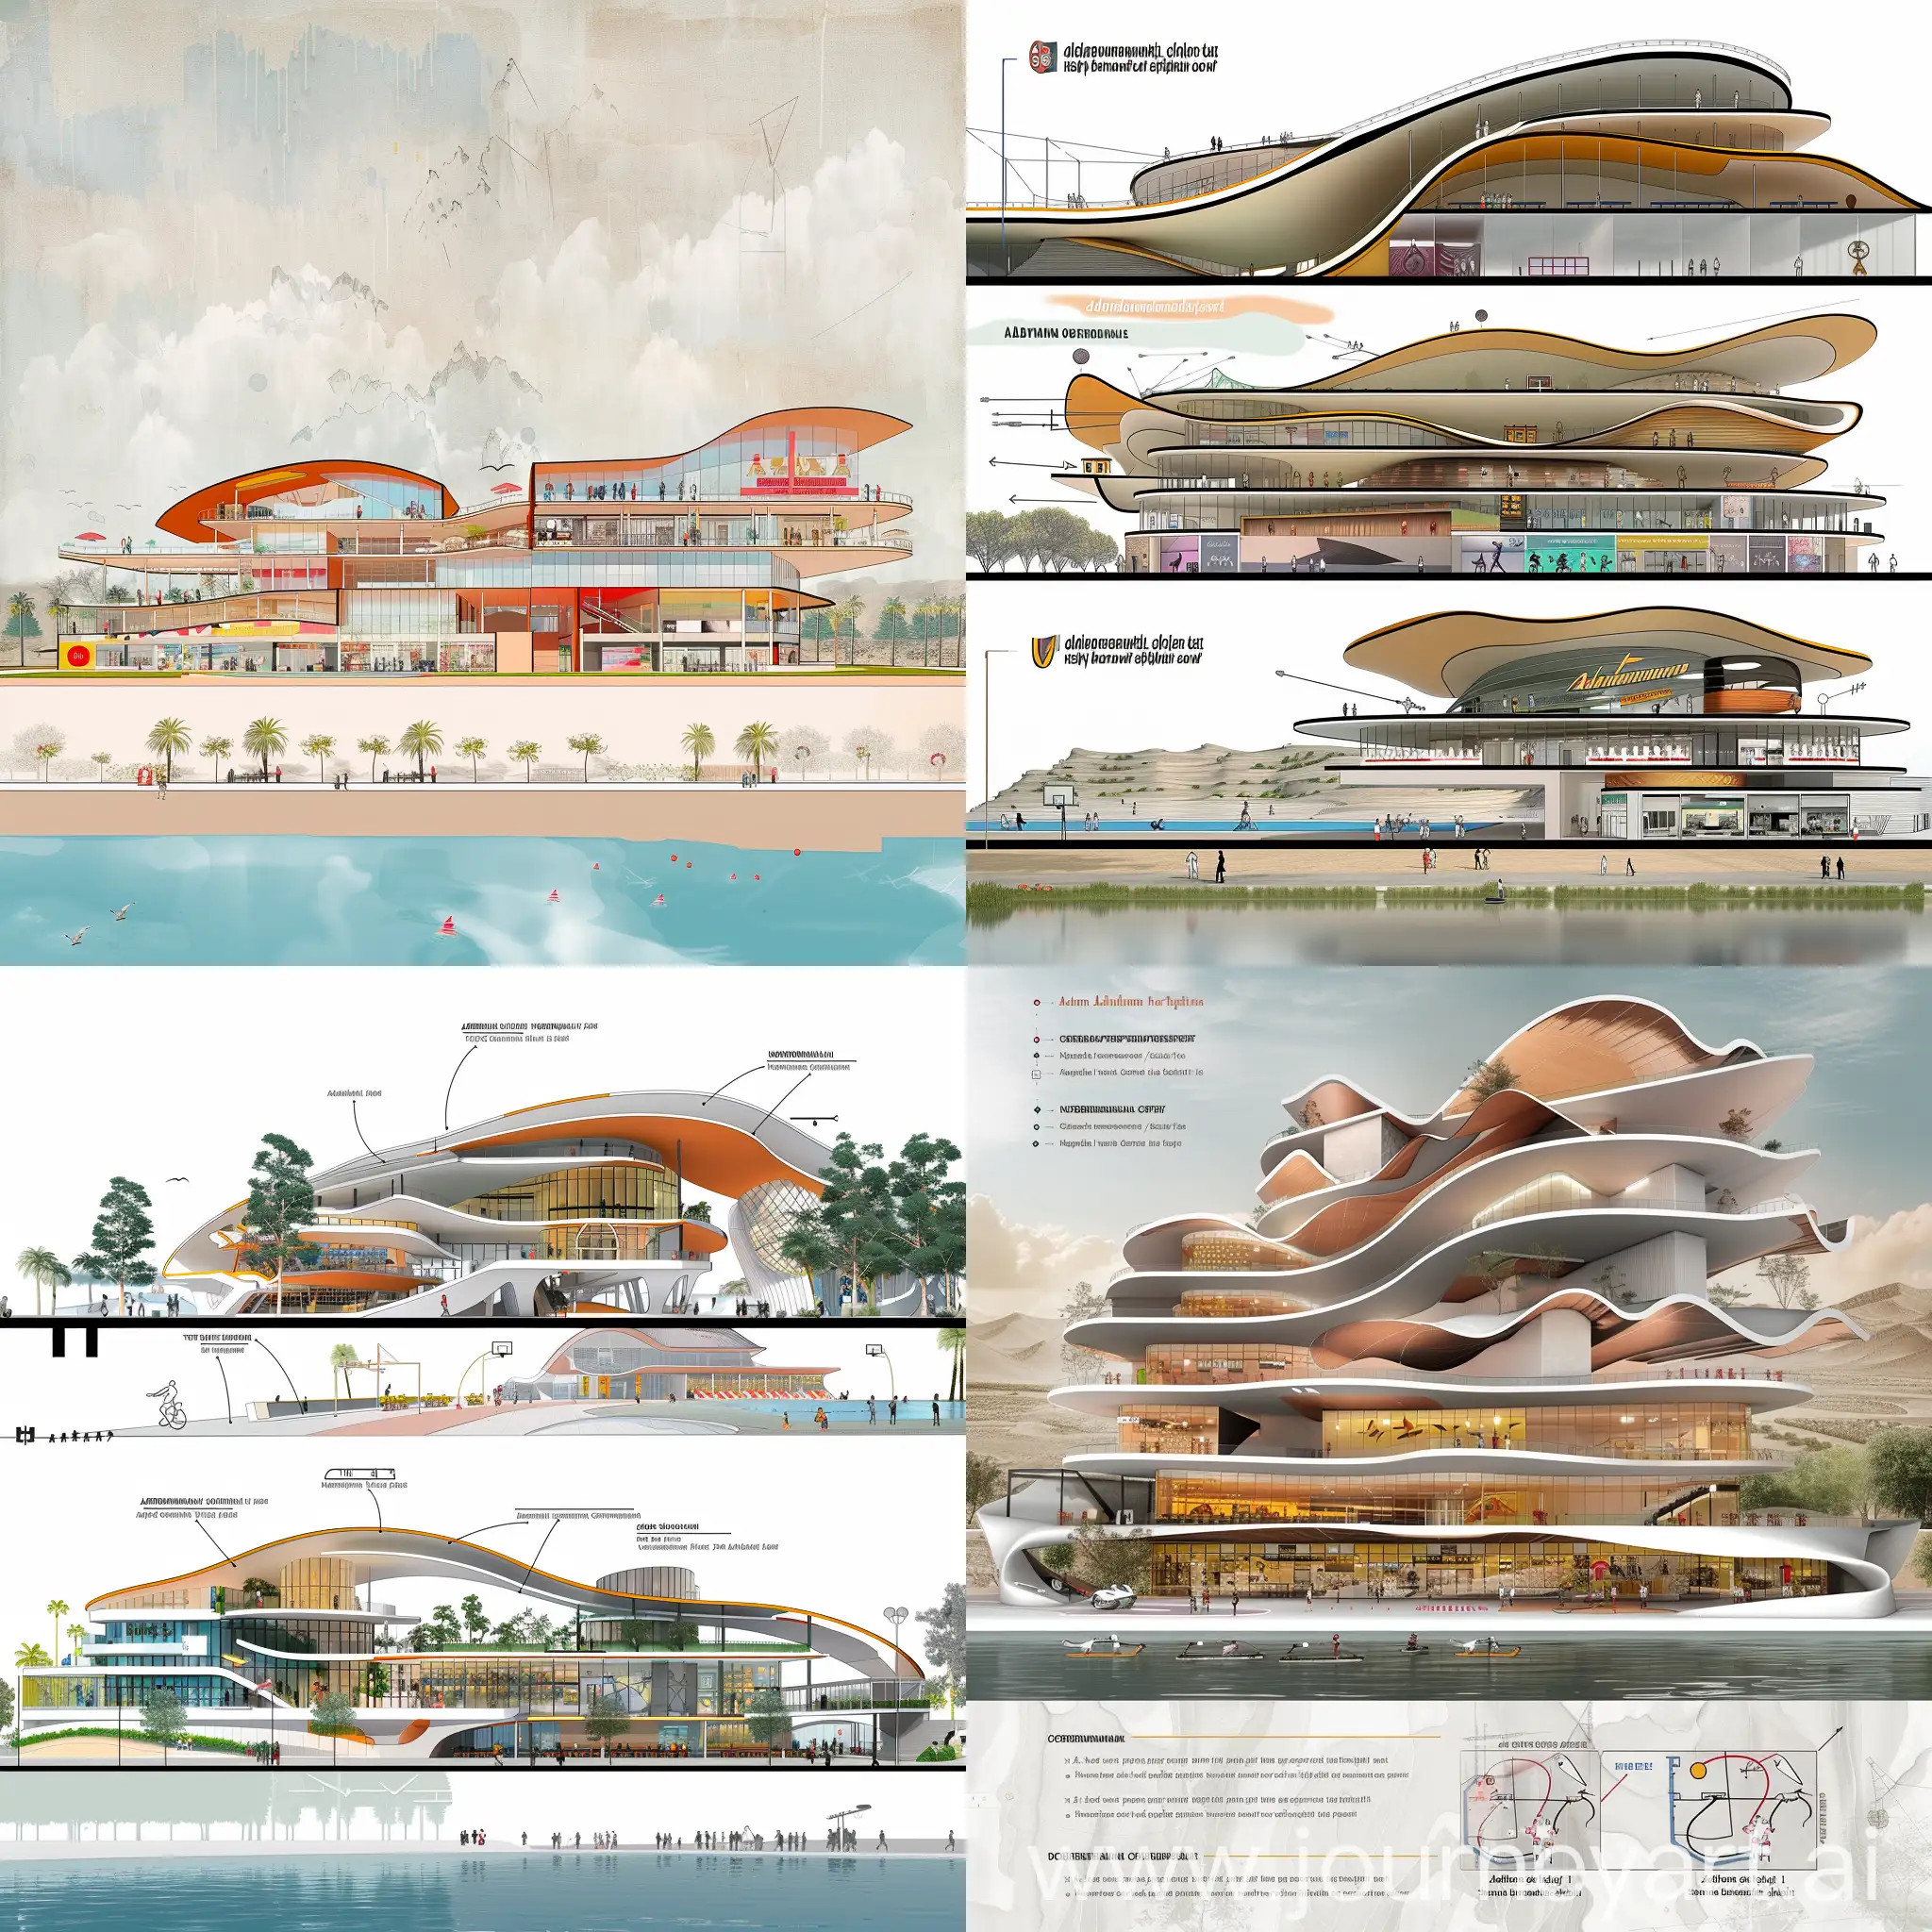 i want you to generate accurate and visually appealing section images for this architectural graduation project in 2D dimention. "Designing a sports village in New Alamien City, Egypt, the site boasts a picturesque lake view from the north and is prominently positioned along the main road from the south. The key components of the project include a main hall for basketball, handball, and other sports, a smaller hall for diverse activities, a vibrant food court, an outdoor court for archery with spectator seating, a compact administrative zone, a unique Soccer Beach, a hanged Olympic swimming pool designed to be extraordinary, a small rehabilitation area, and retail stores offering sports-related souvenirs and equipment. The design inspiration is derived from the organic compounds of hormones released during physical exertion, namely Adrenaline, Noradrenaline, Cortisol, and Testosterone. The resulting architectural form embodies the dynamic movement of athletes, featuring abstracted curves. Adrenaline influences varying height levels, Cortisol results in smoother building surfaces, and Testosterone manifests as competitive buildings trying to surpass one another. The overall style aspires to be smart and iconic, capturing the essence of the project's unique inspiration."